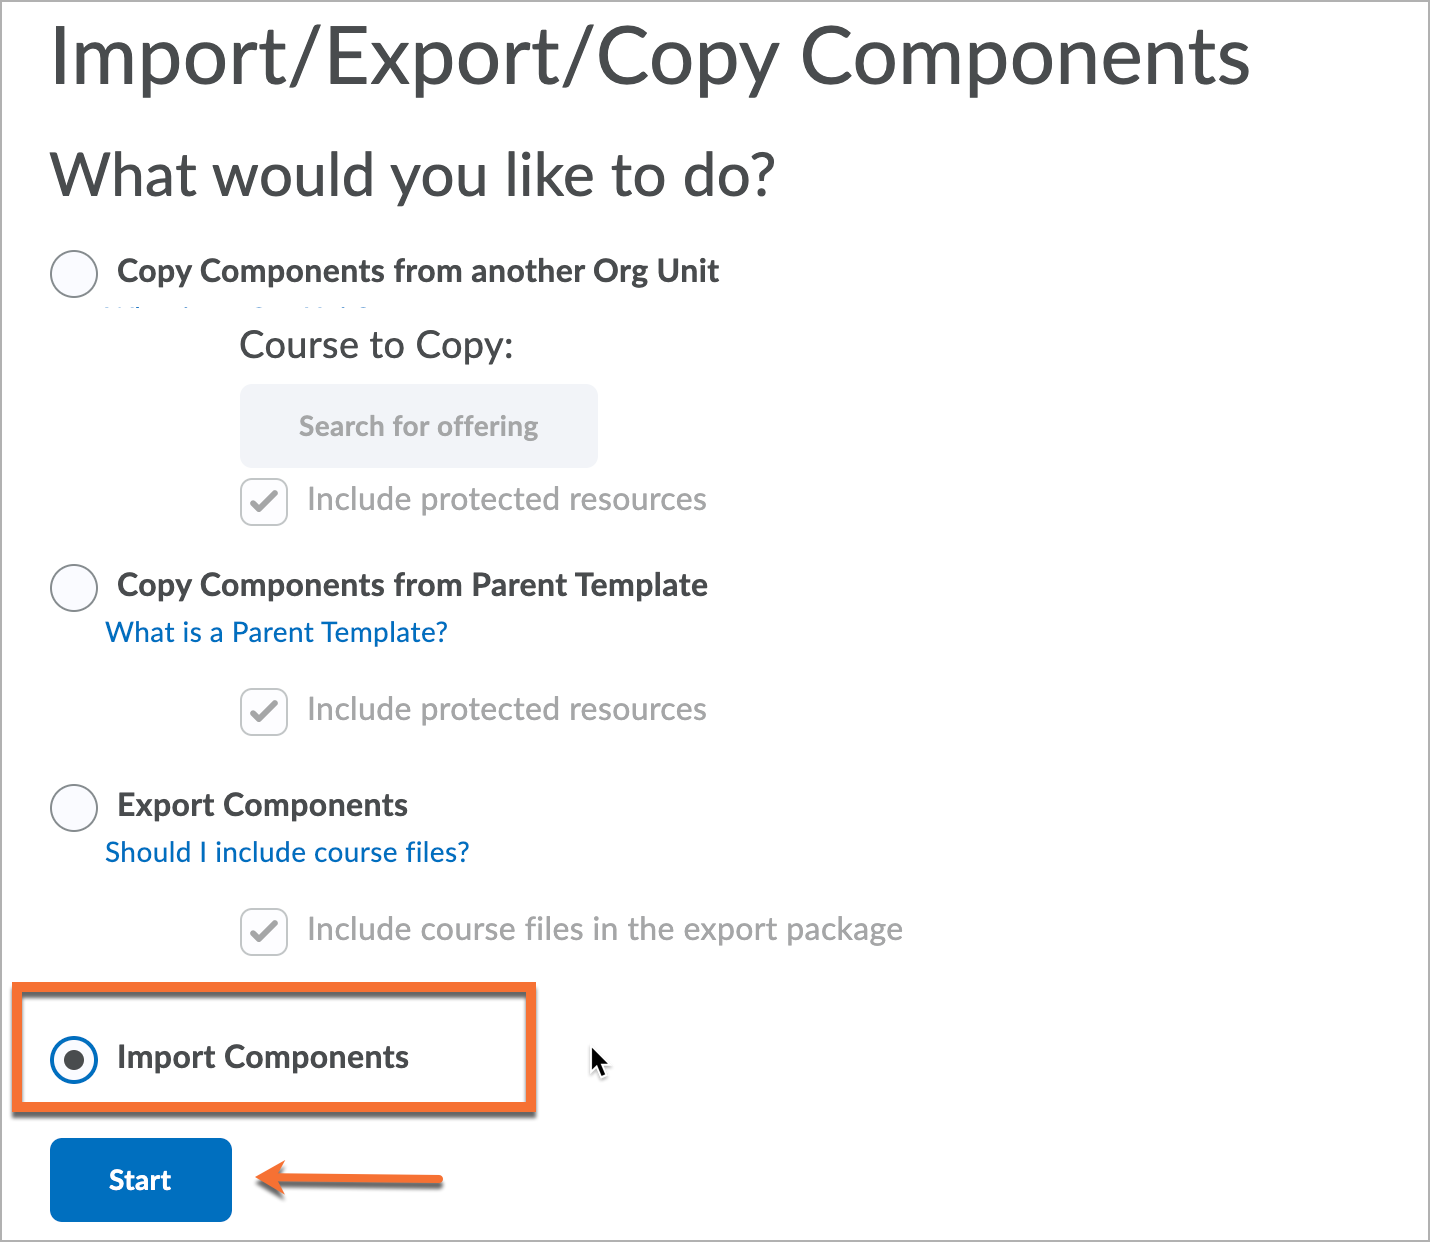 Select the "Import" option